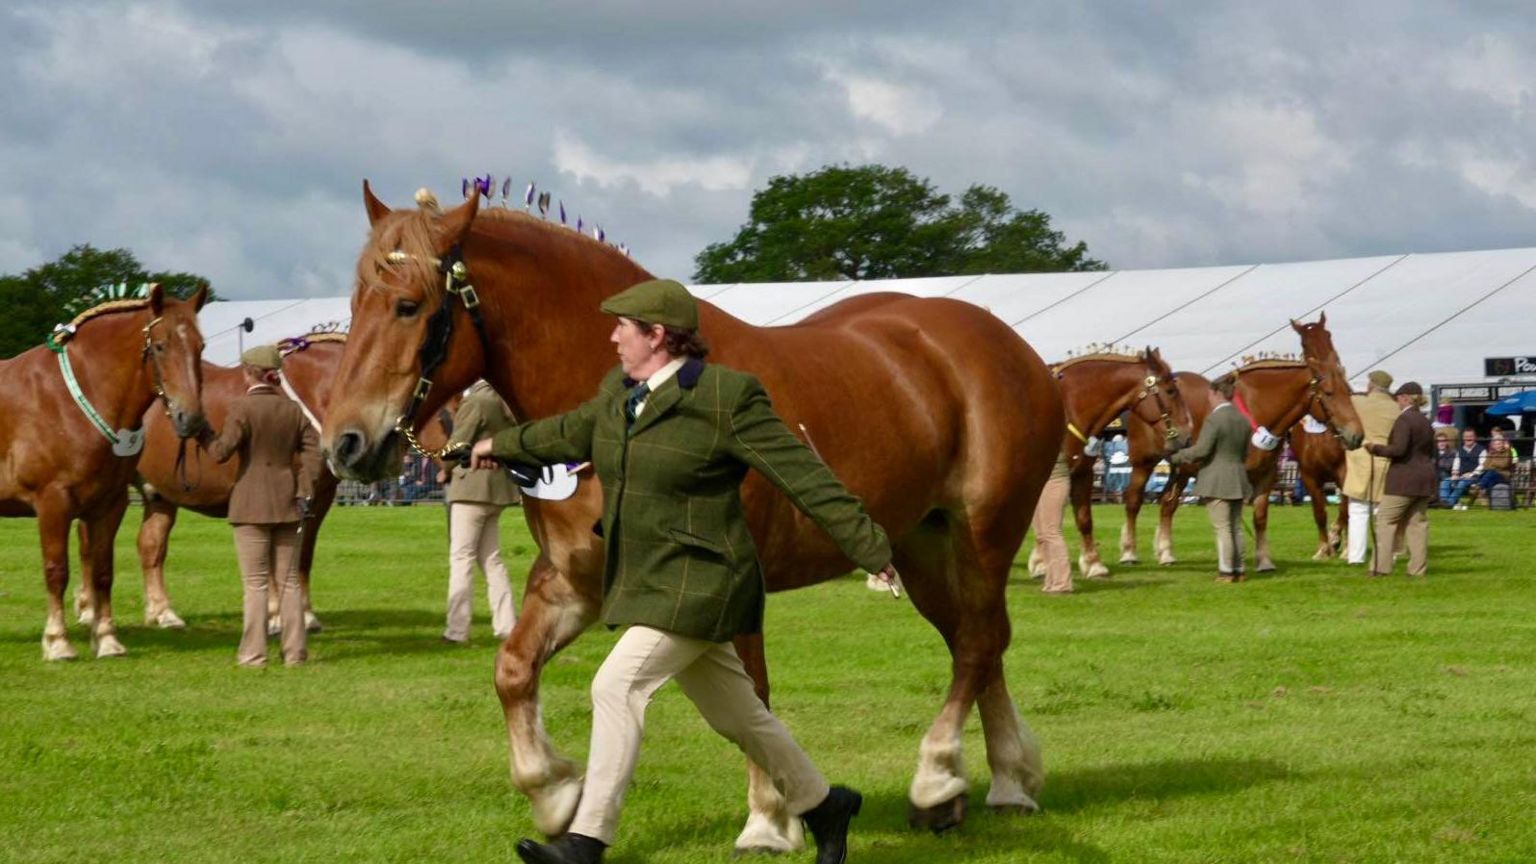 A Suffolk Punch horse being led by a woman 